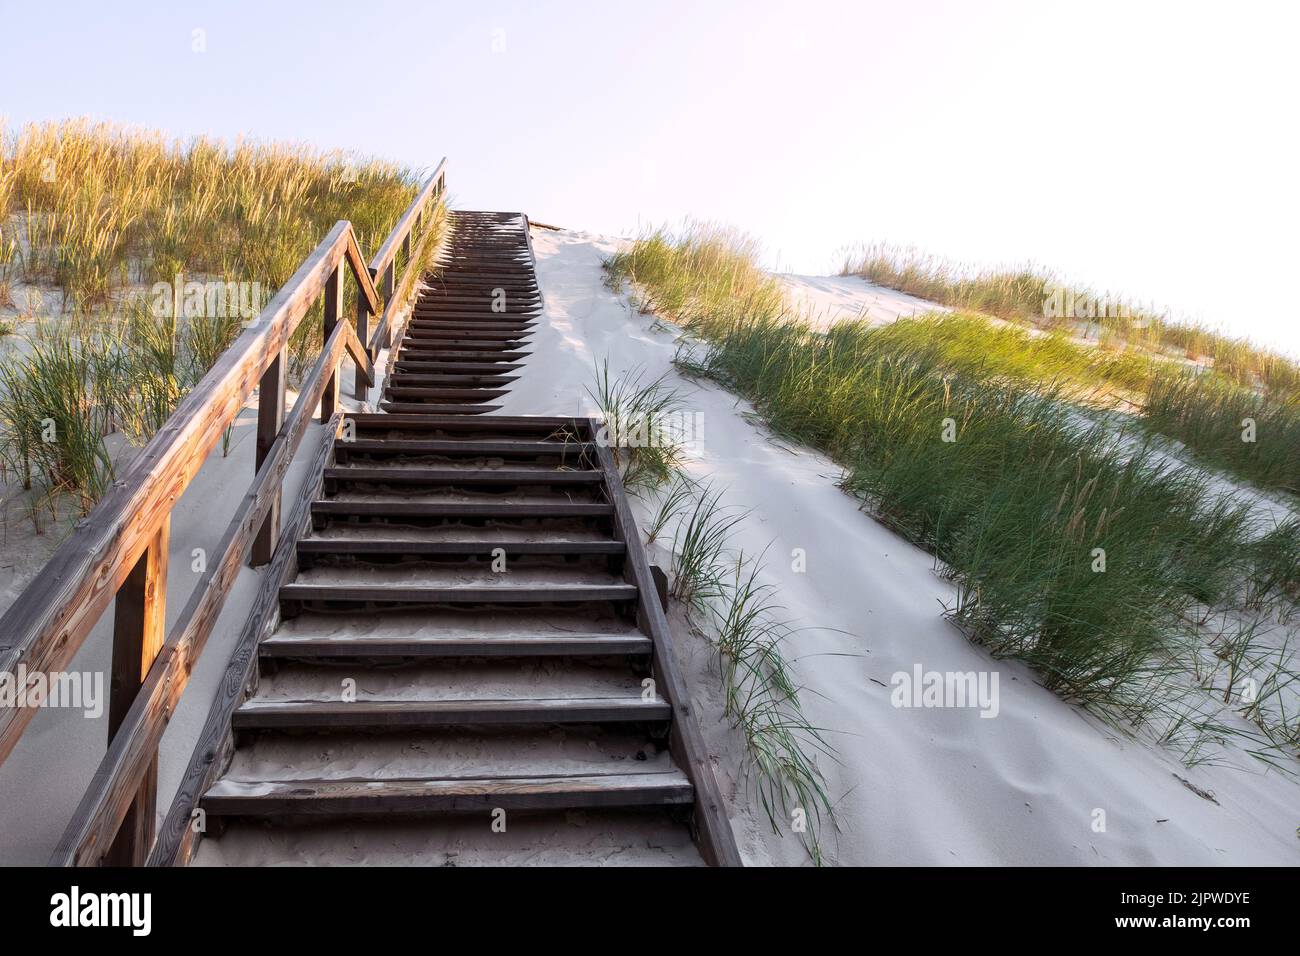 Wooden stairs on sand dune covered with grass, way to the entrance of the beach. Coastal landscape by morning light. Baltic sea. Stock Photo